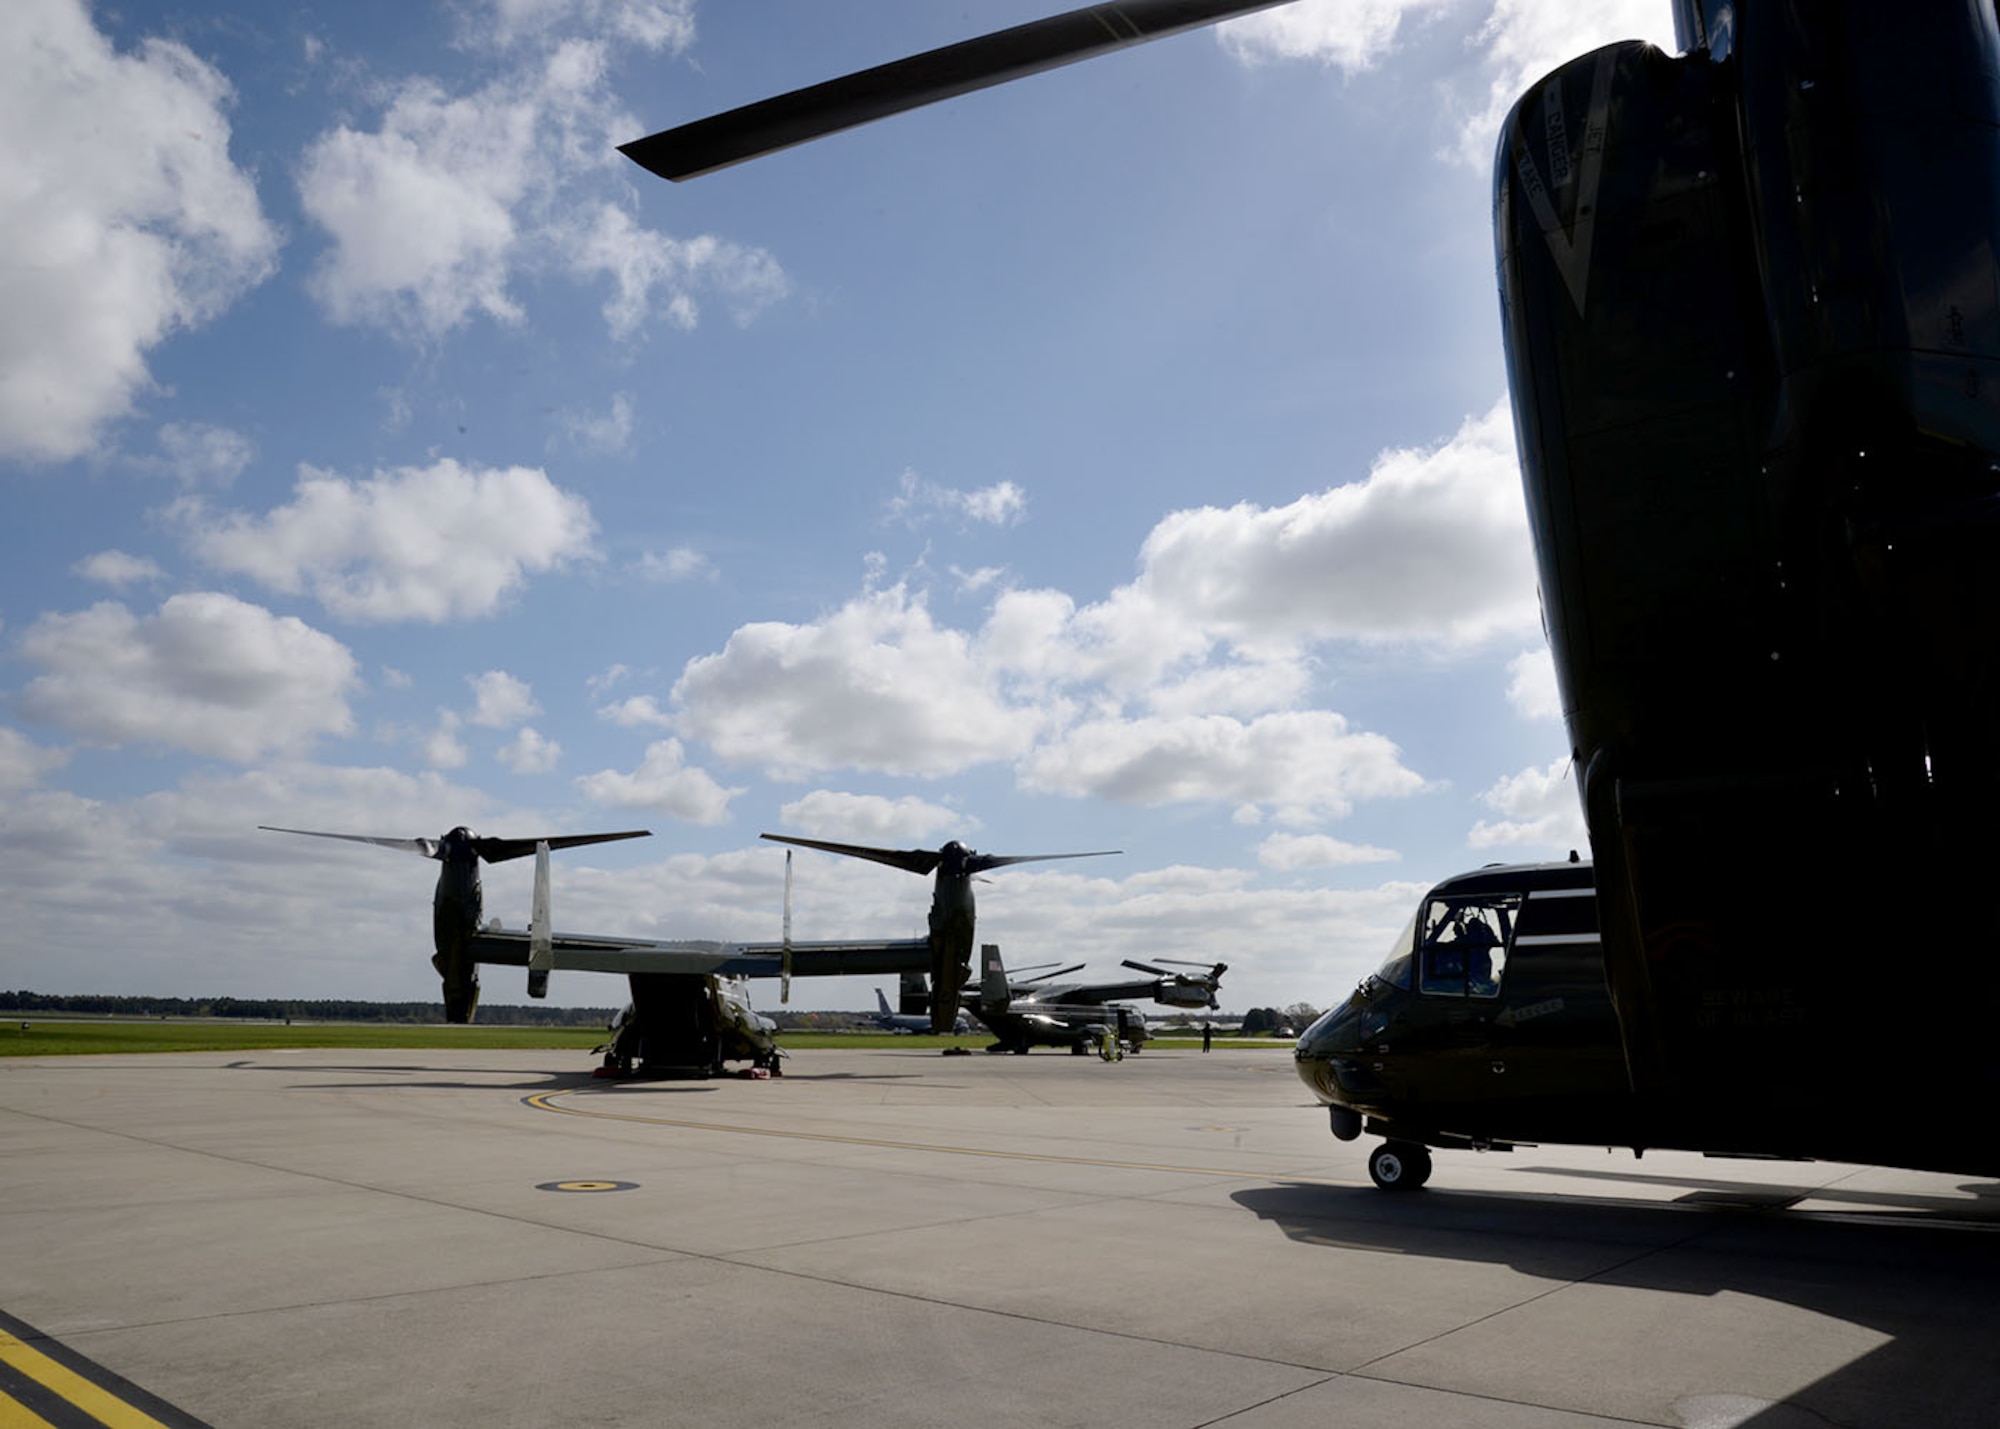 Three U.S. Marine Corps MV-22 Ospreys sit on the flightline April 19, 2016, on RAF Mildenhall, England. The multi-mission, tilt-rotor military aircraft, based out of Quantico, Va., were at RAF Mildenhall in support of the President’s visit to the United Kingdom for bilateral meetings and to the Hannover Messe being held in Germany. U.S. European Command and US Air Forces in Europe-Air Forces Africa were working with other government agencies in the U.K. and Germany to provide assistance as requested, to ensure a successful visit.  (U.S. Air Force photo by Karen Abeyasekere/Released)